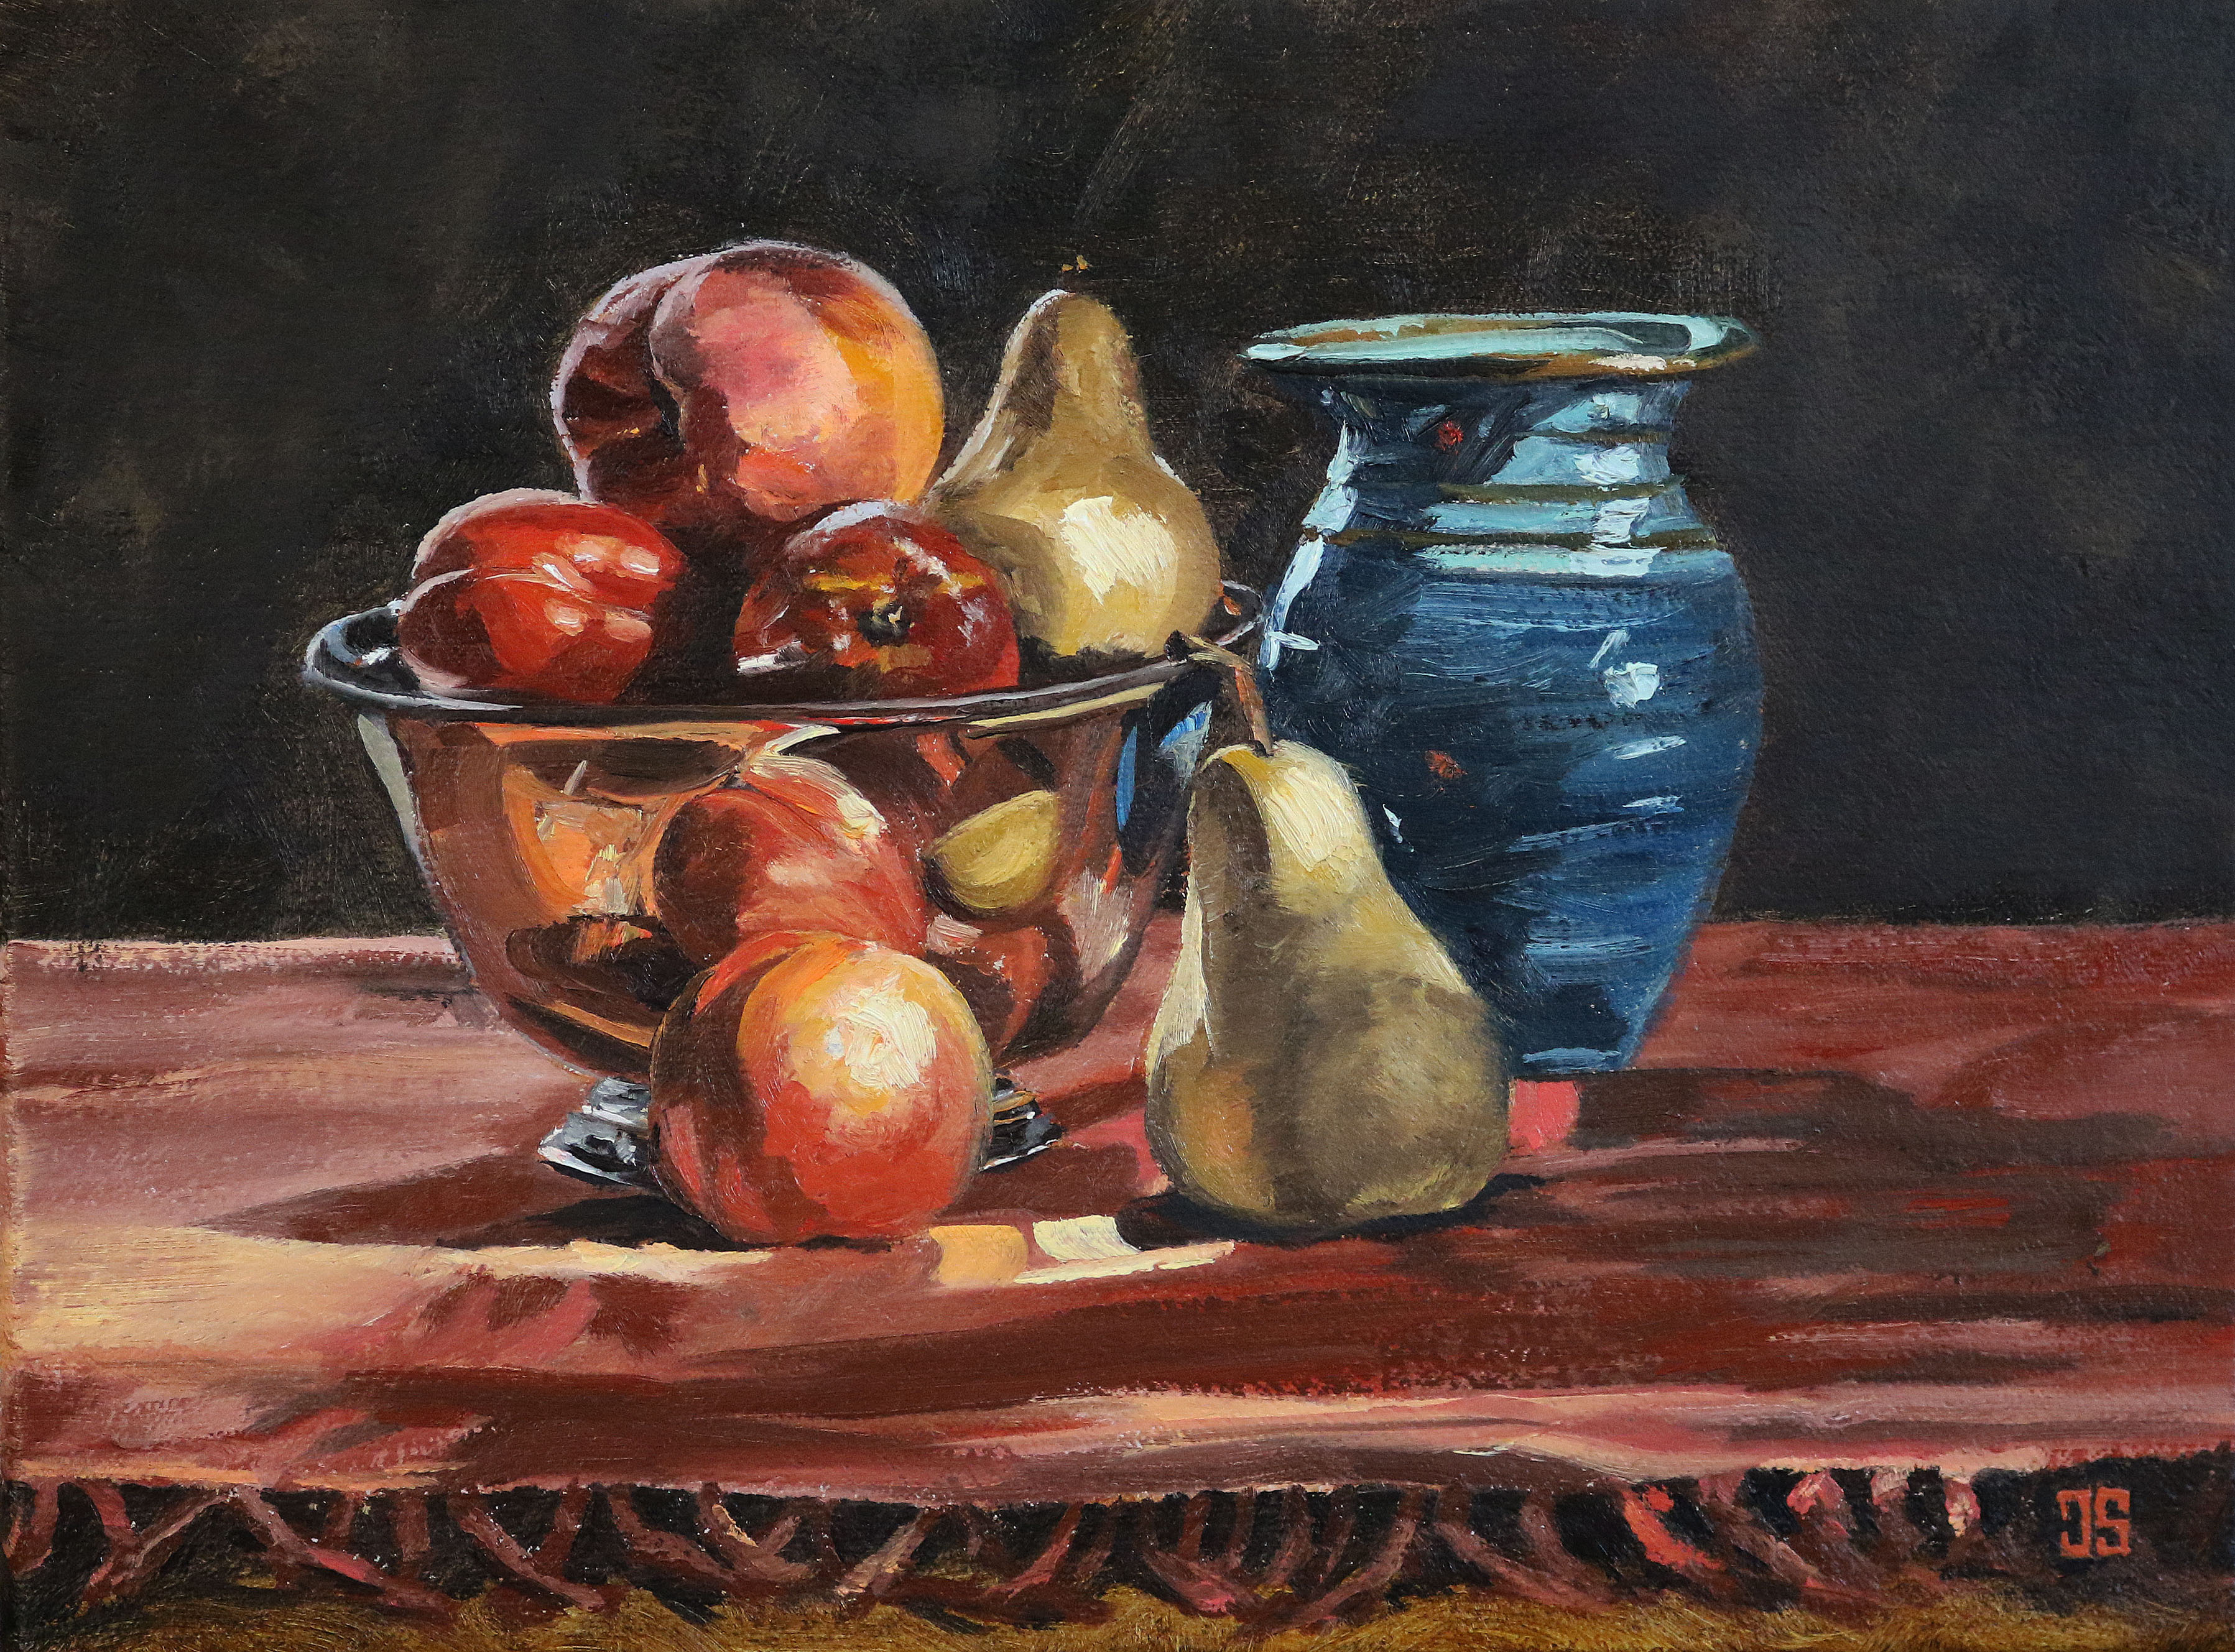 Oil painting "Peach, Pears, Nectarines" by Jeffrey Dale Starr